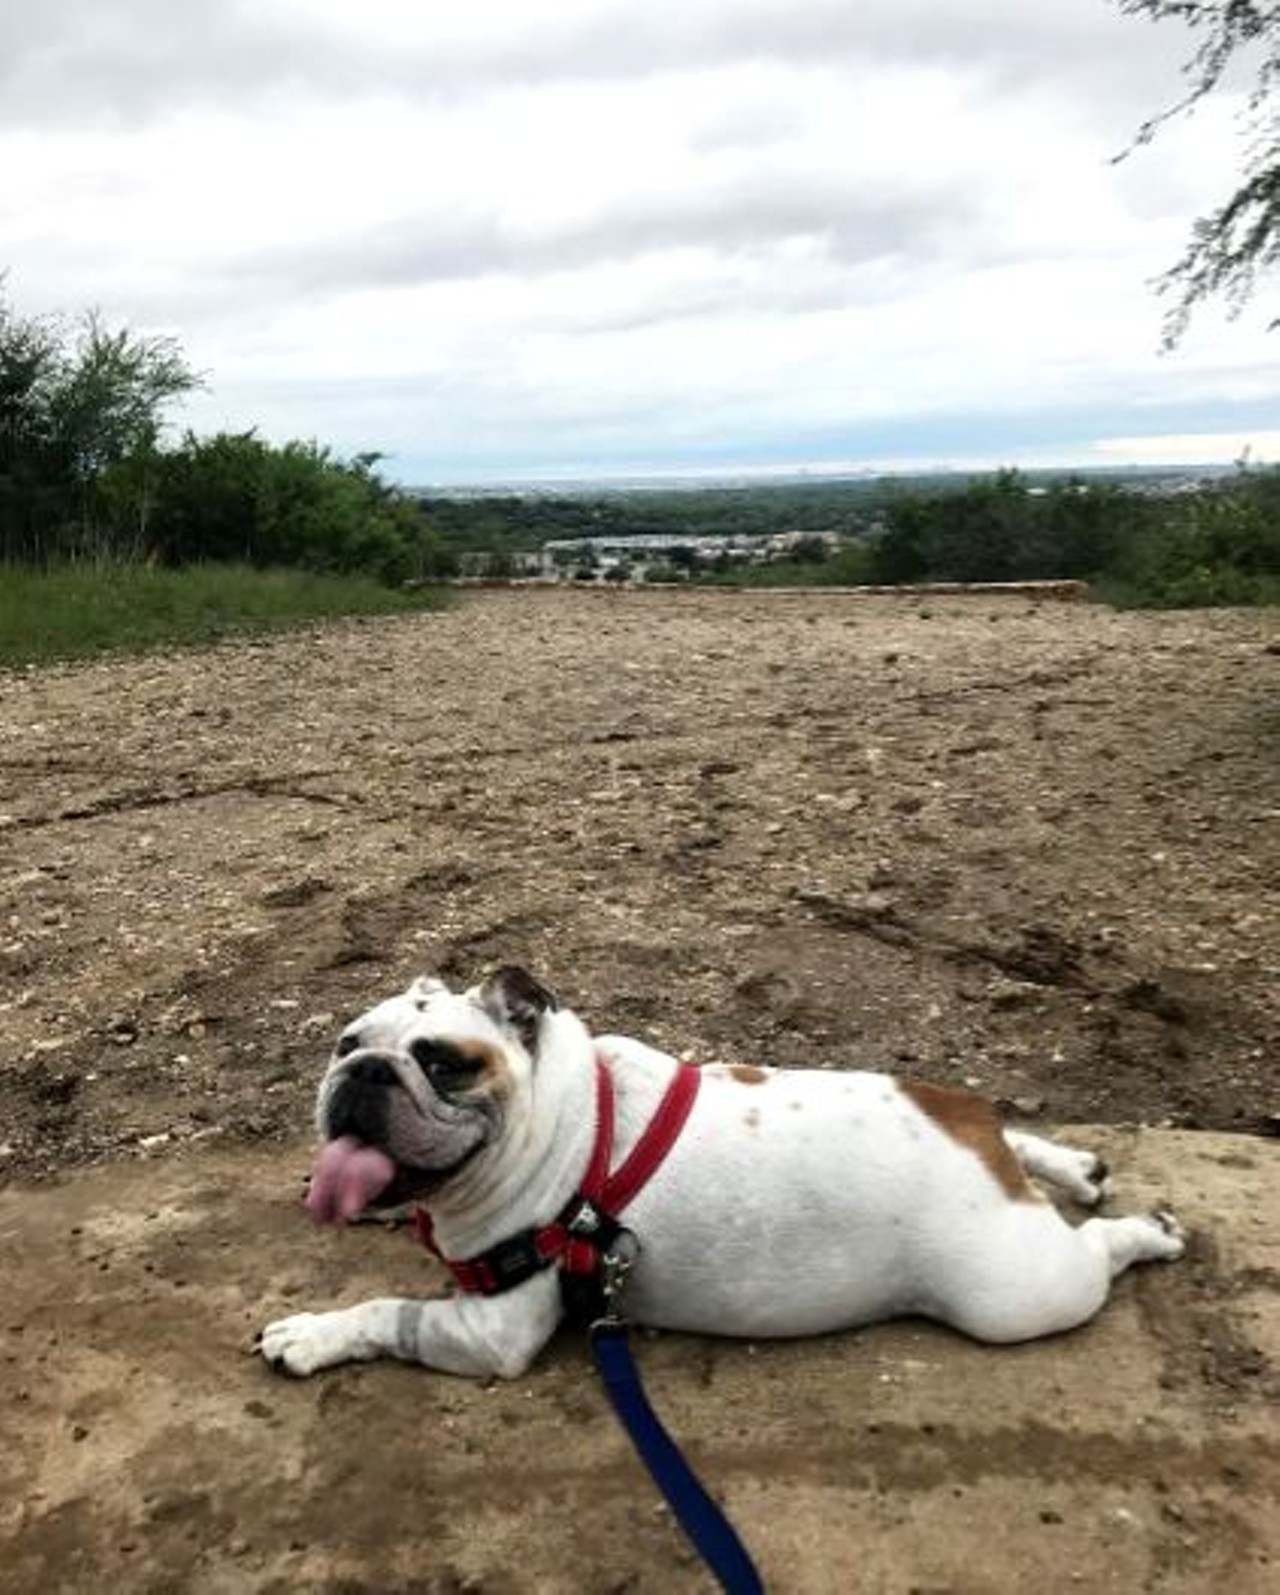 The 17 Best Off-Leash Dog Parks in San Antonio (2022) - The Dog